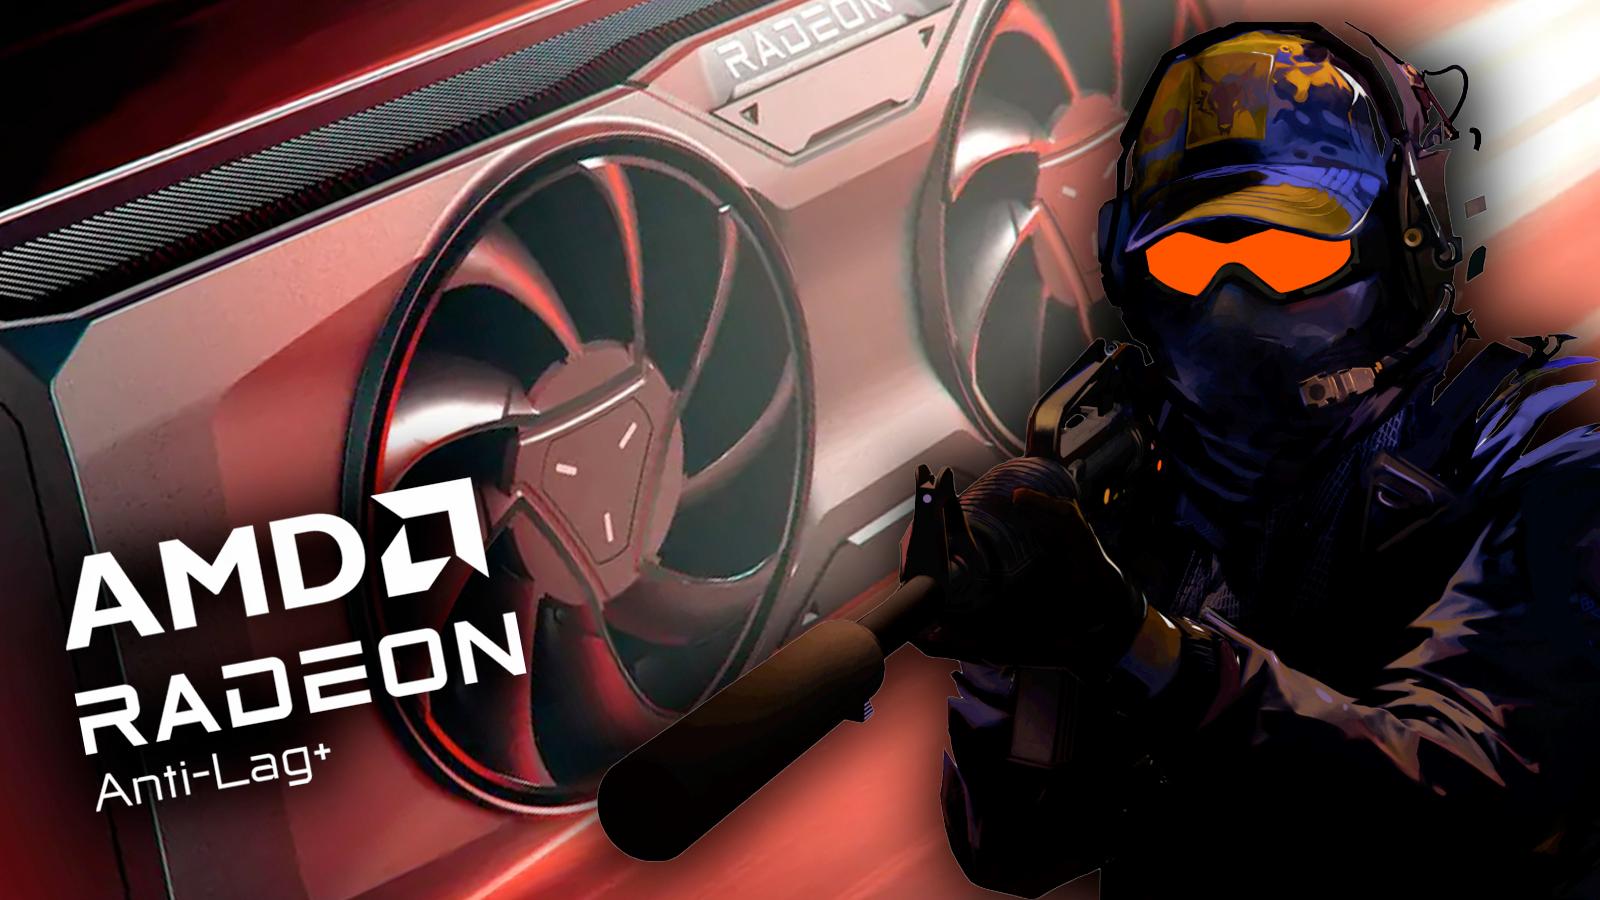 counter-strike 2 lead art character with amd gpu in the back and logo for anti-lag+